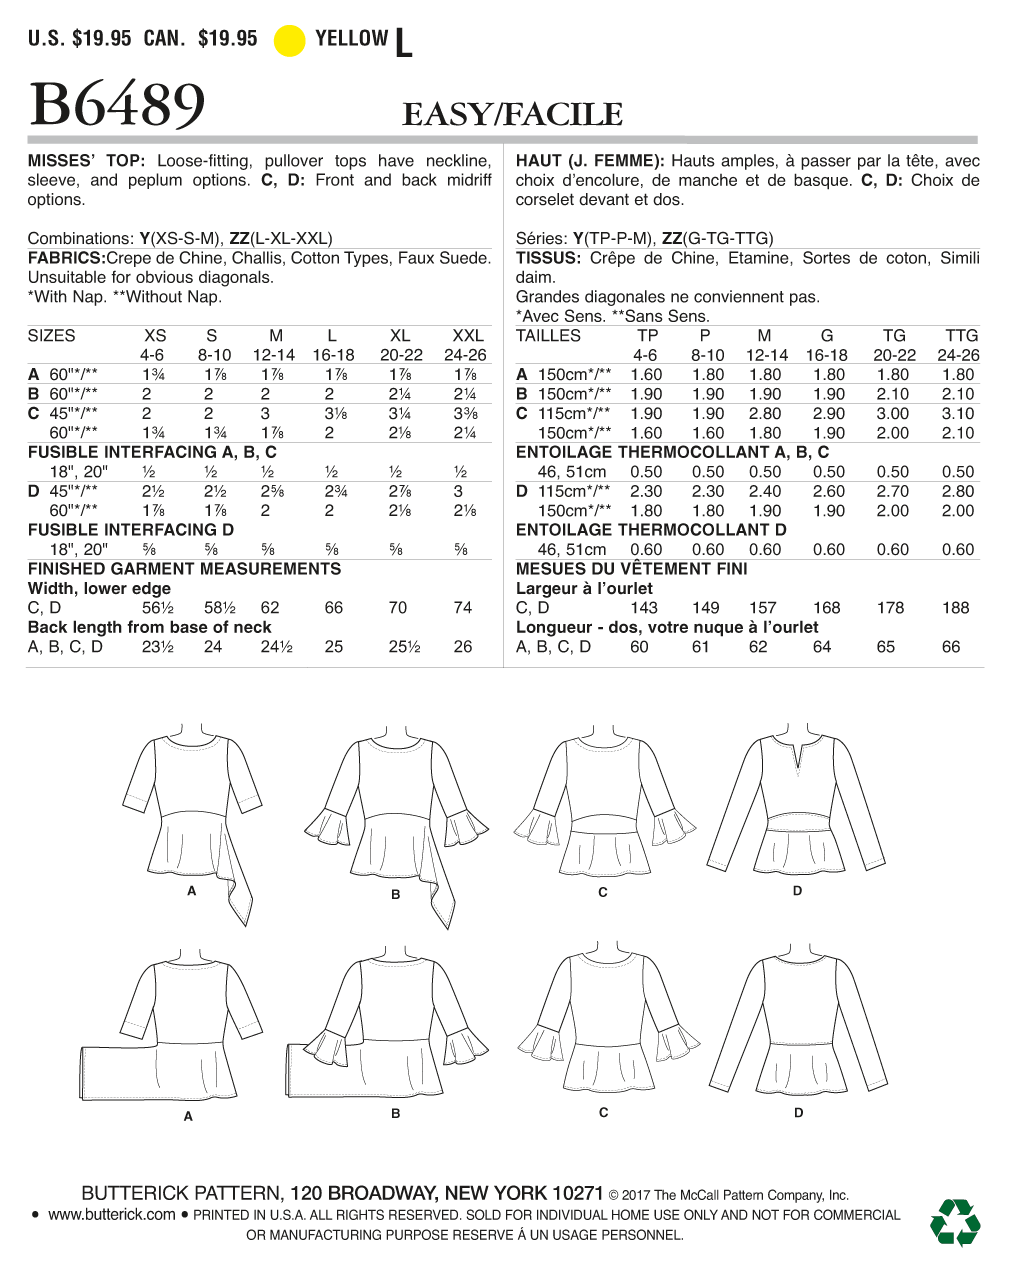 Butterick B6489 Misses' Pullover Tops with Sleeve and Peplum Variations